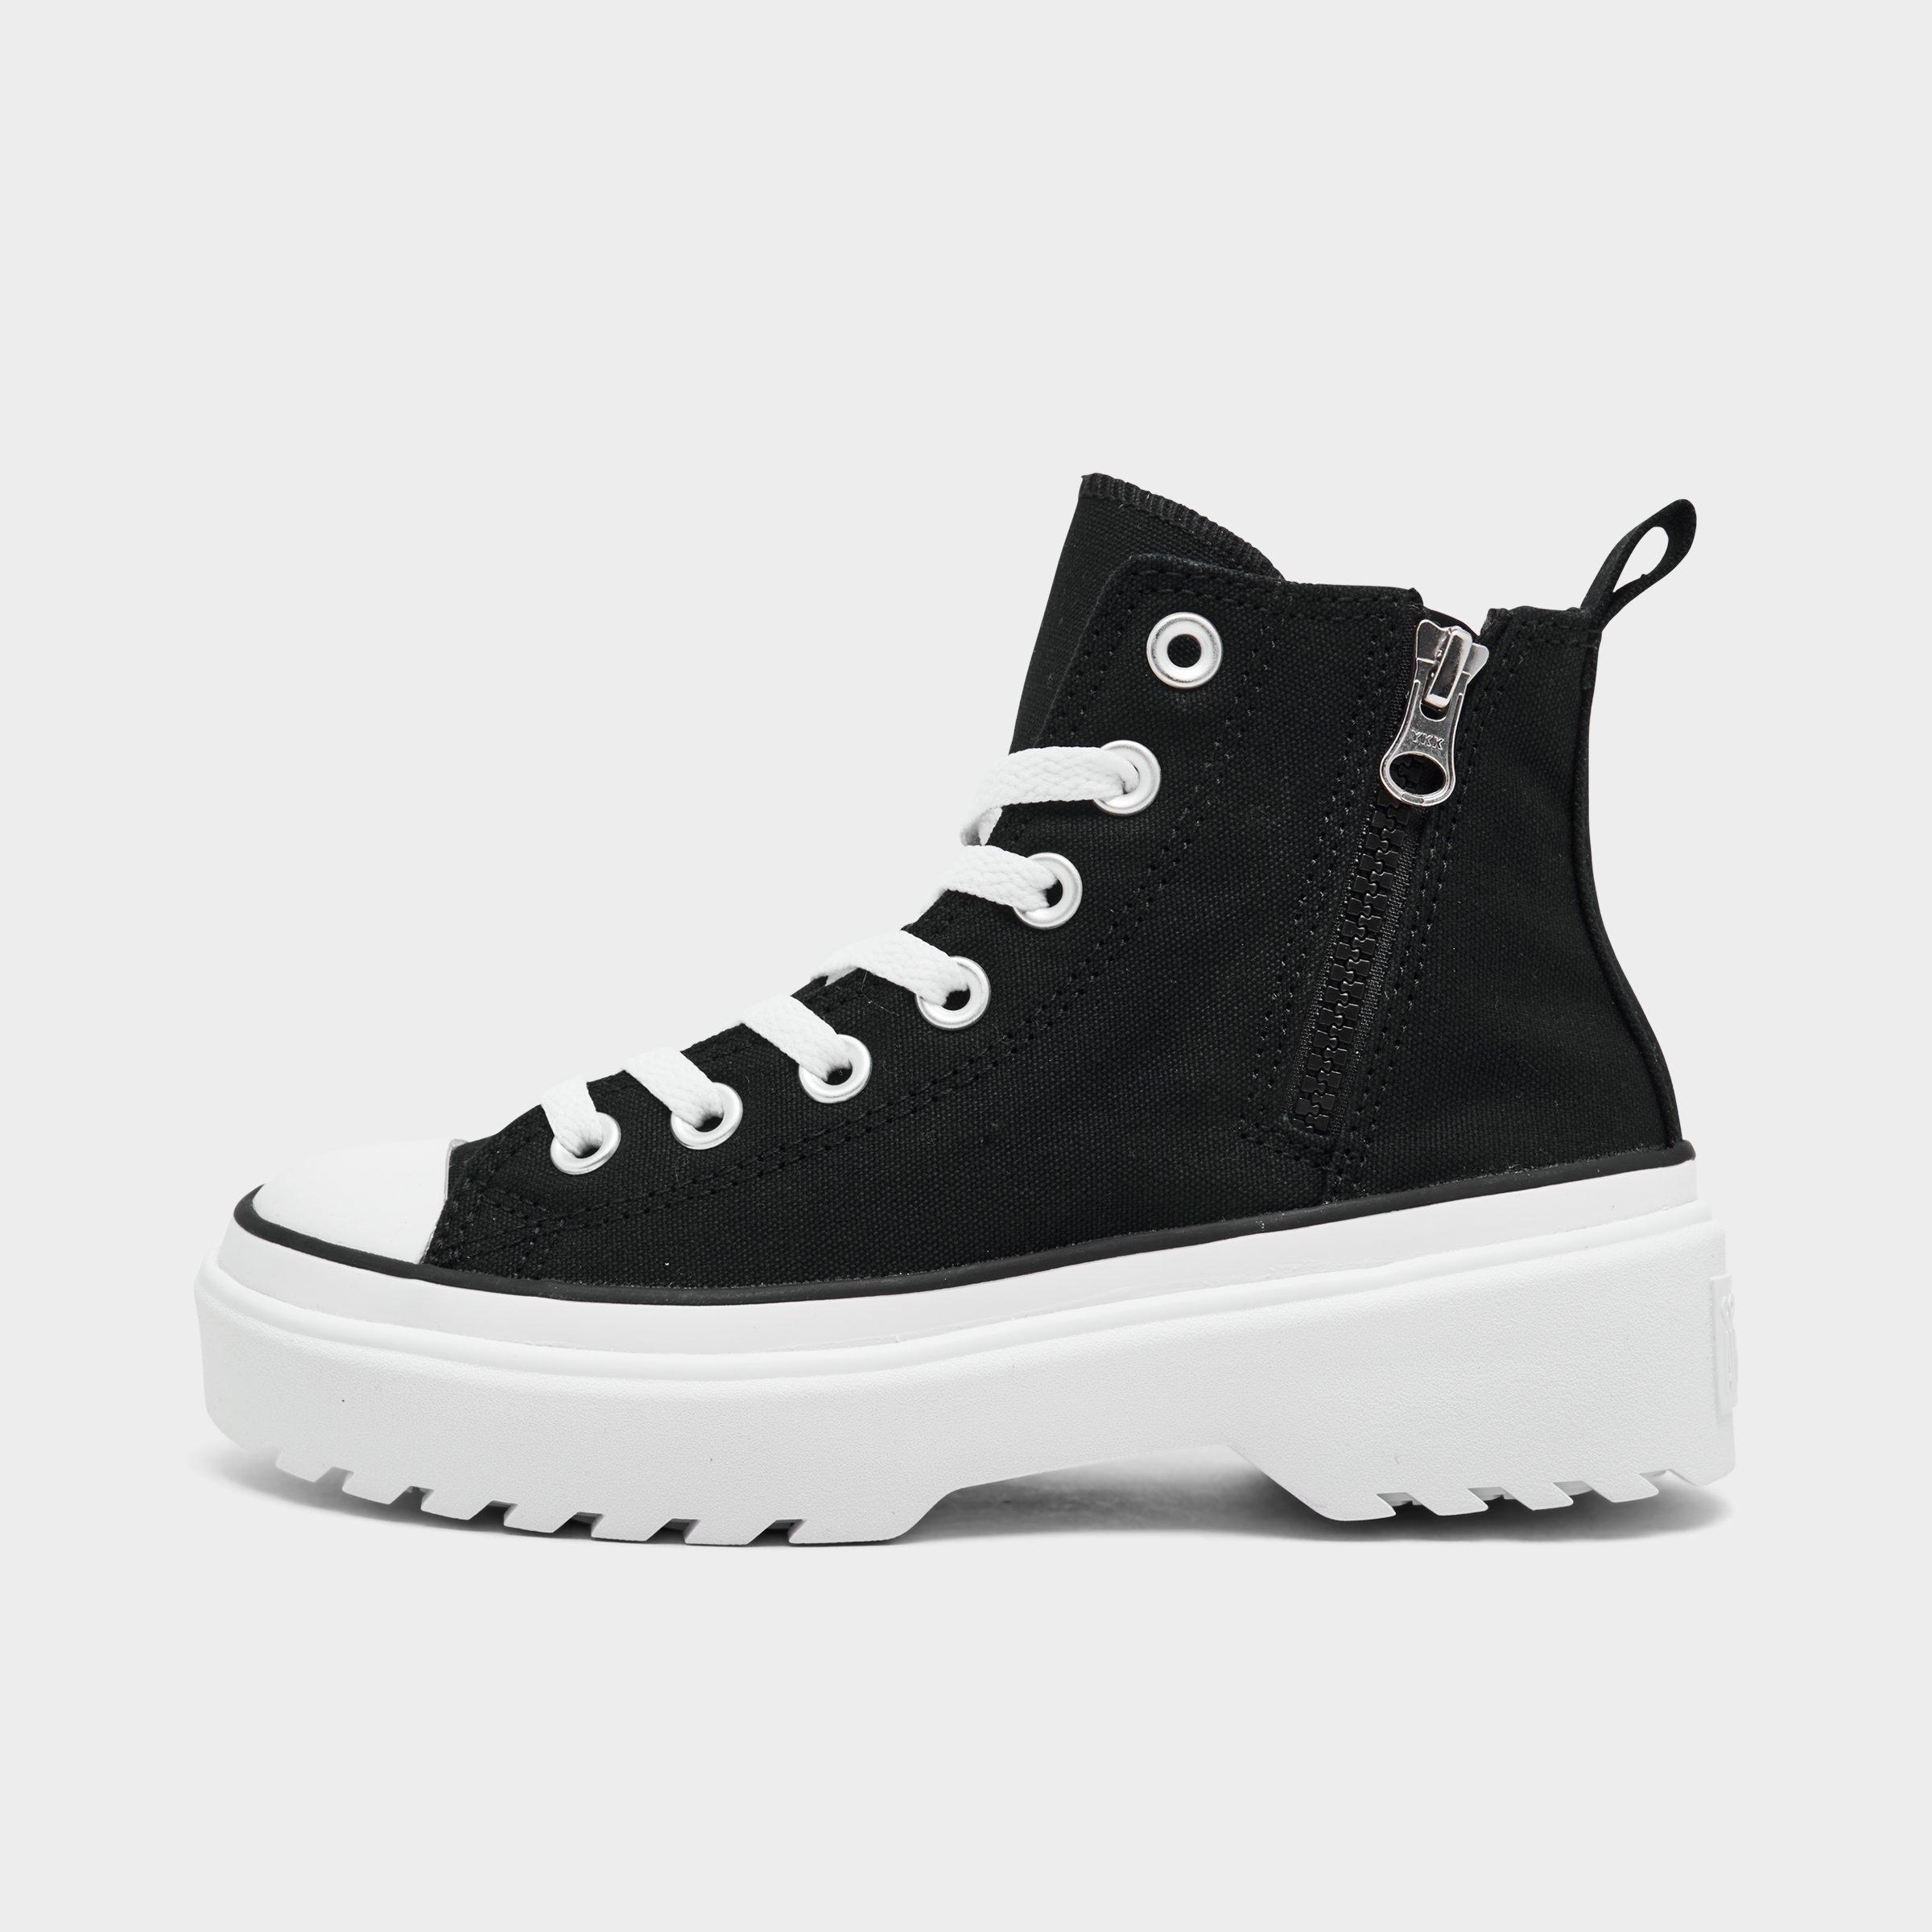 Shop Converse Girls' Little Kids' Chuck Taylor All Star High Top Lugged Casual Shoes In Black/black/white